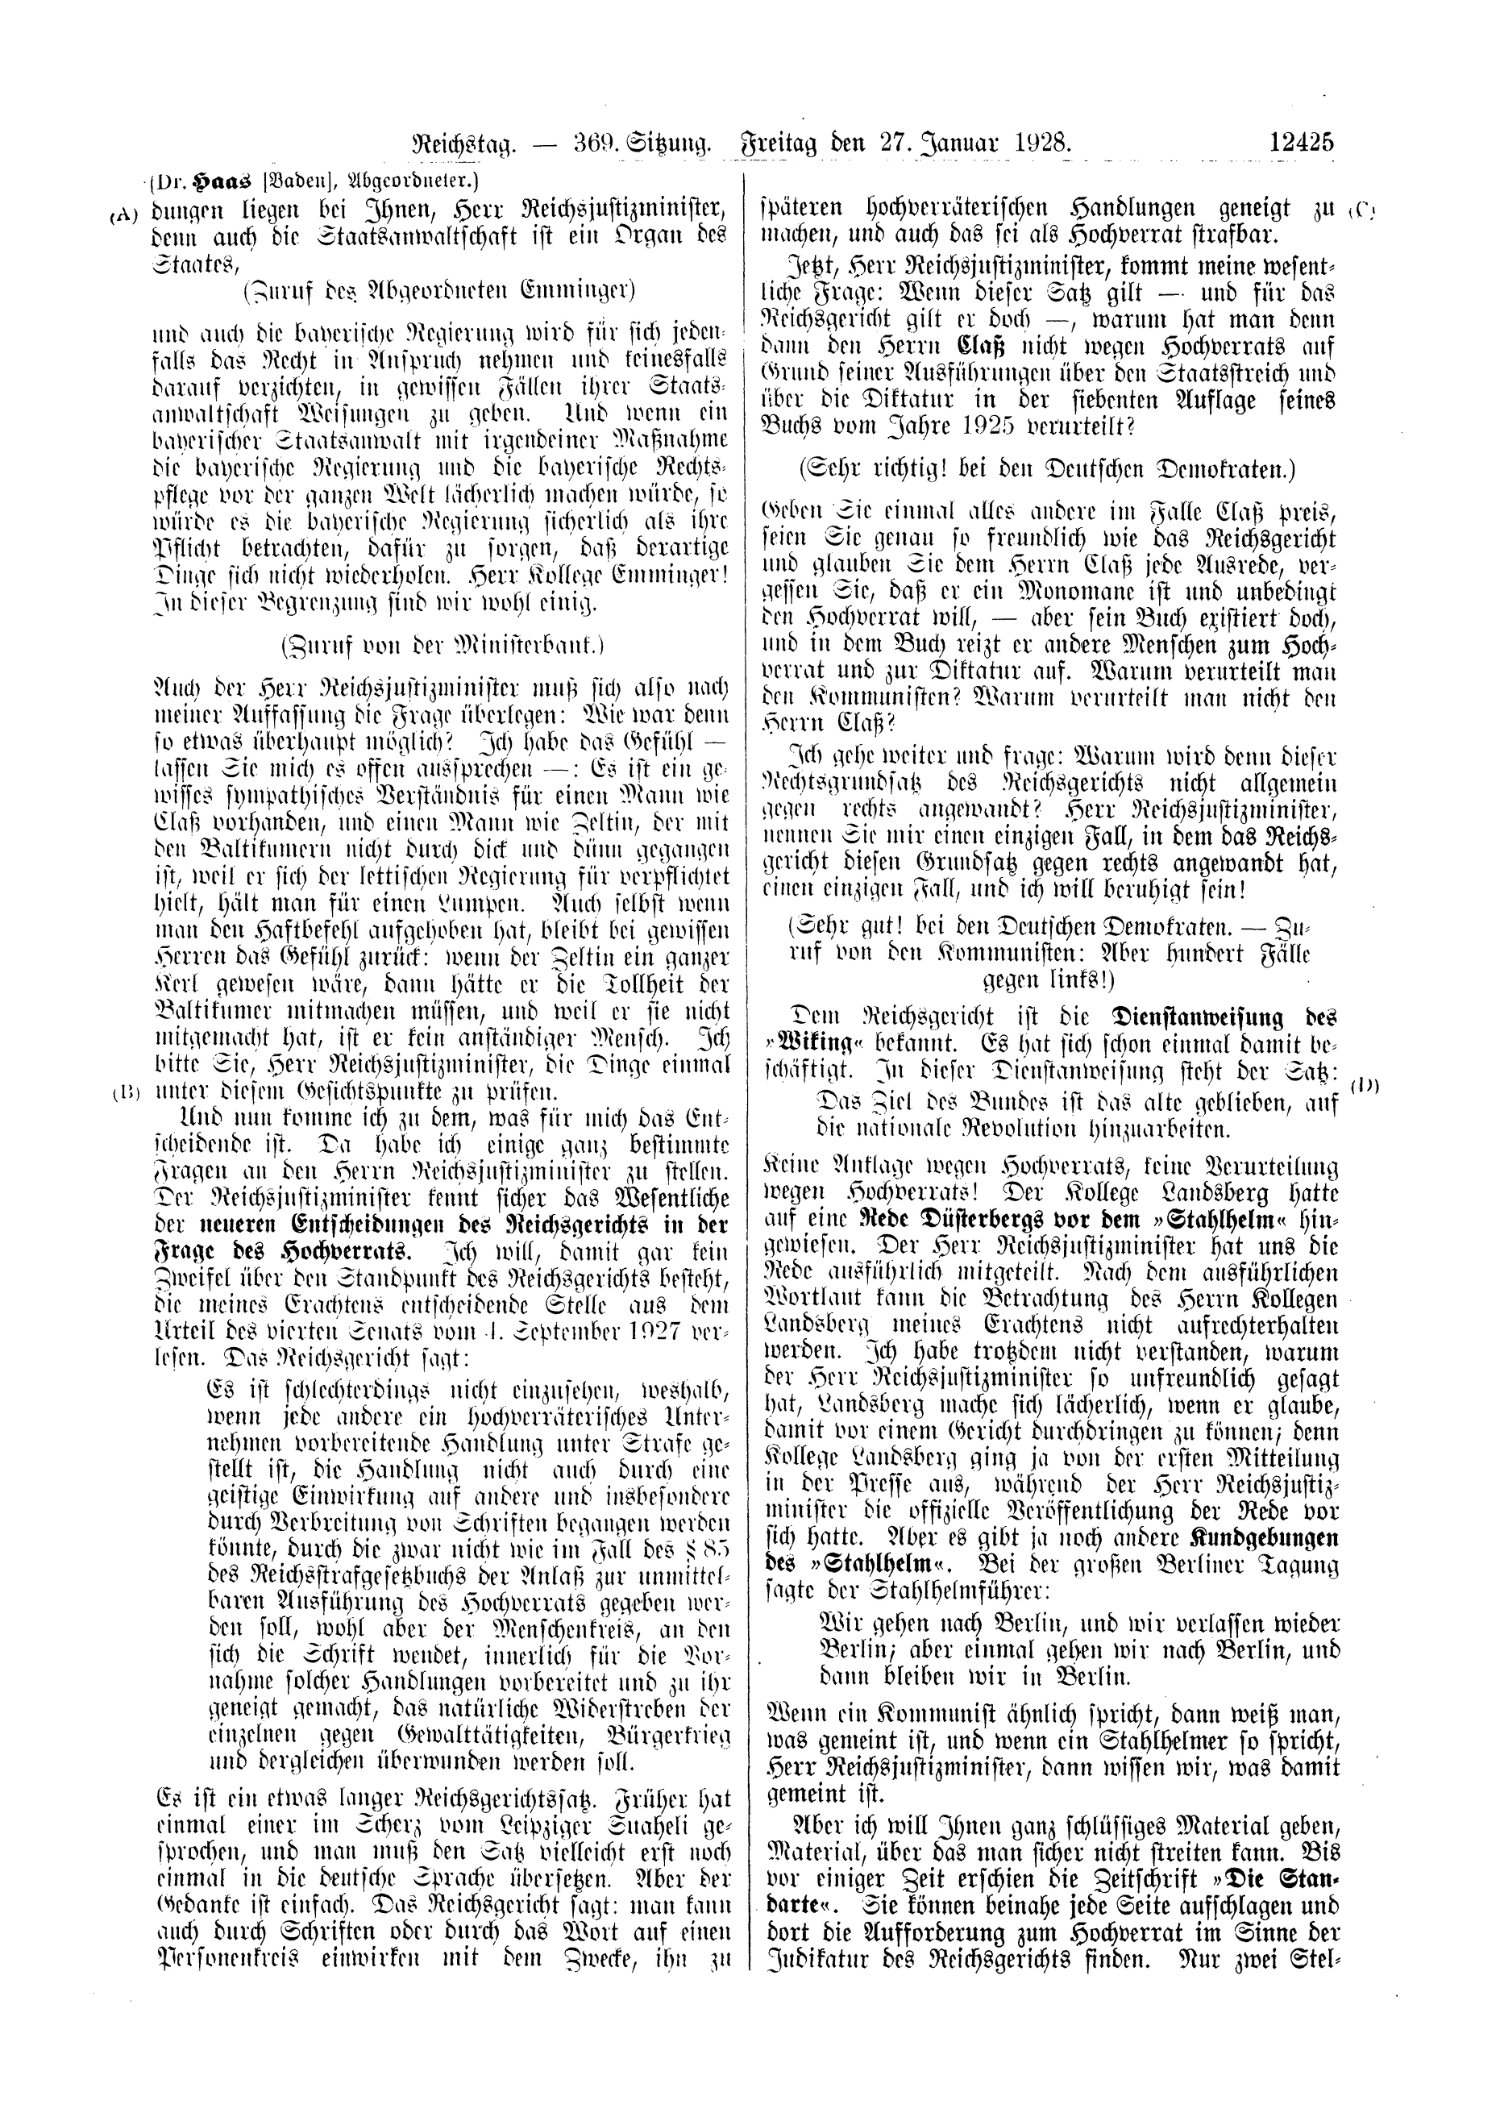 Scan of page 12425